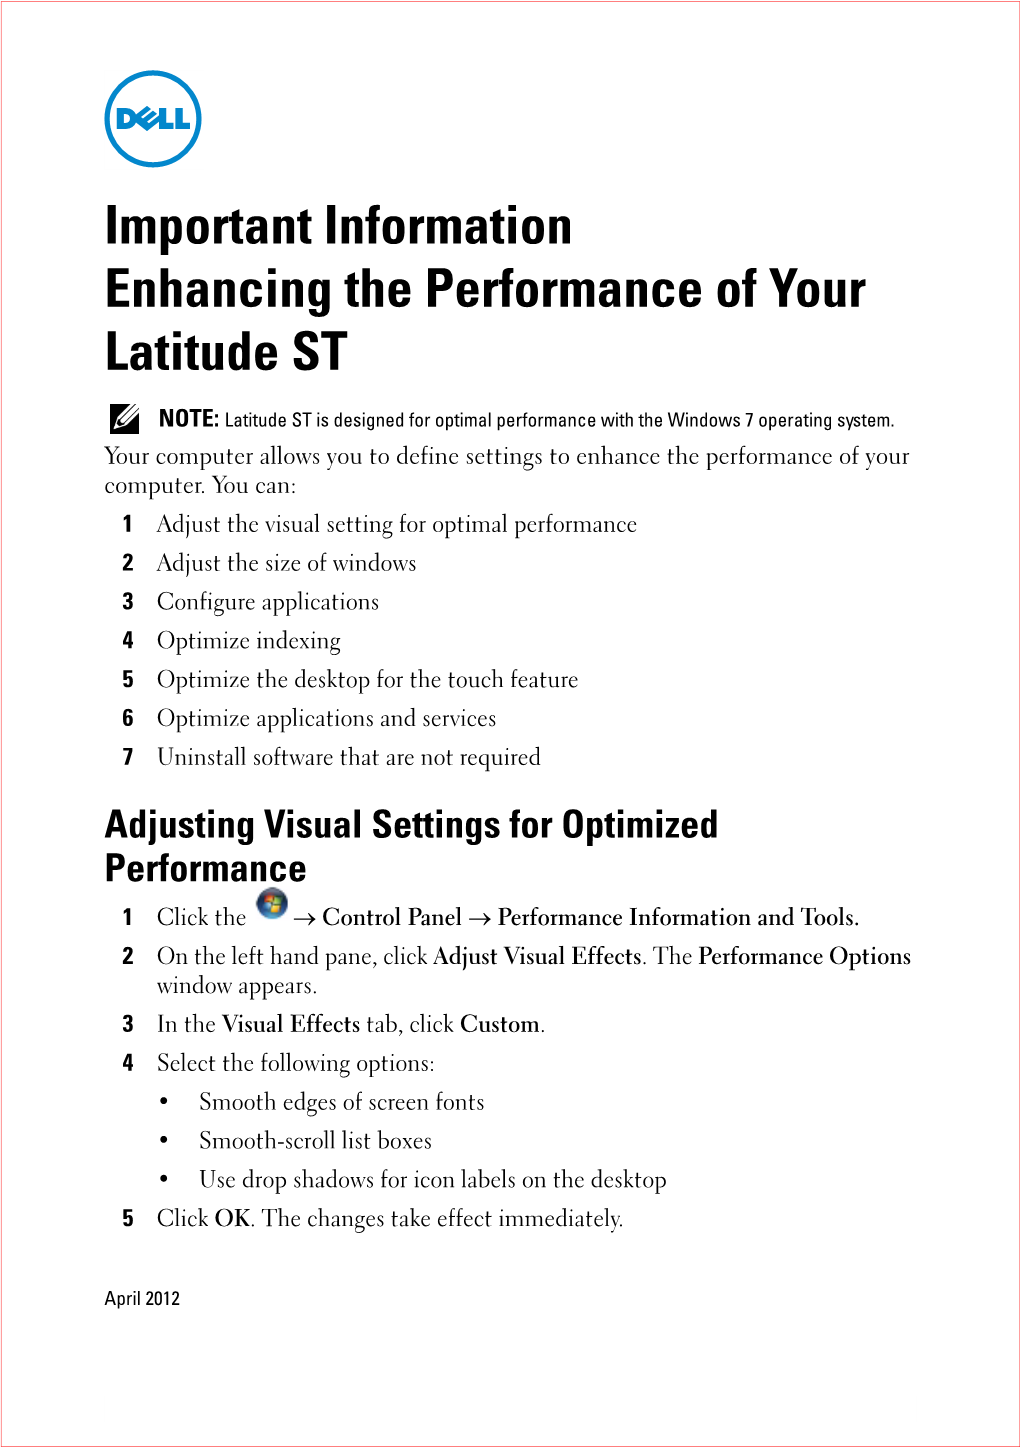 Enhancing the Performance of Your Latitude ST